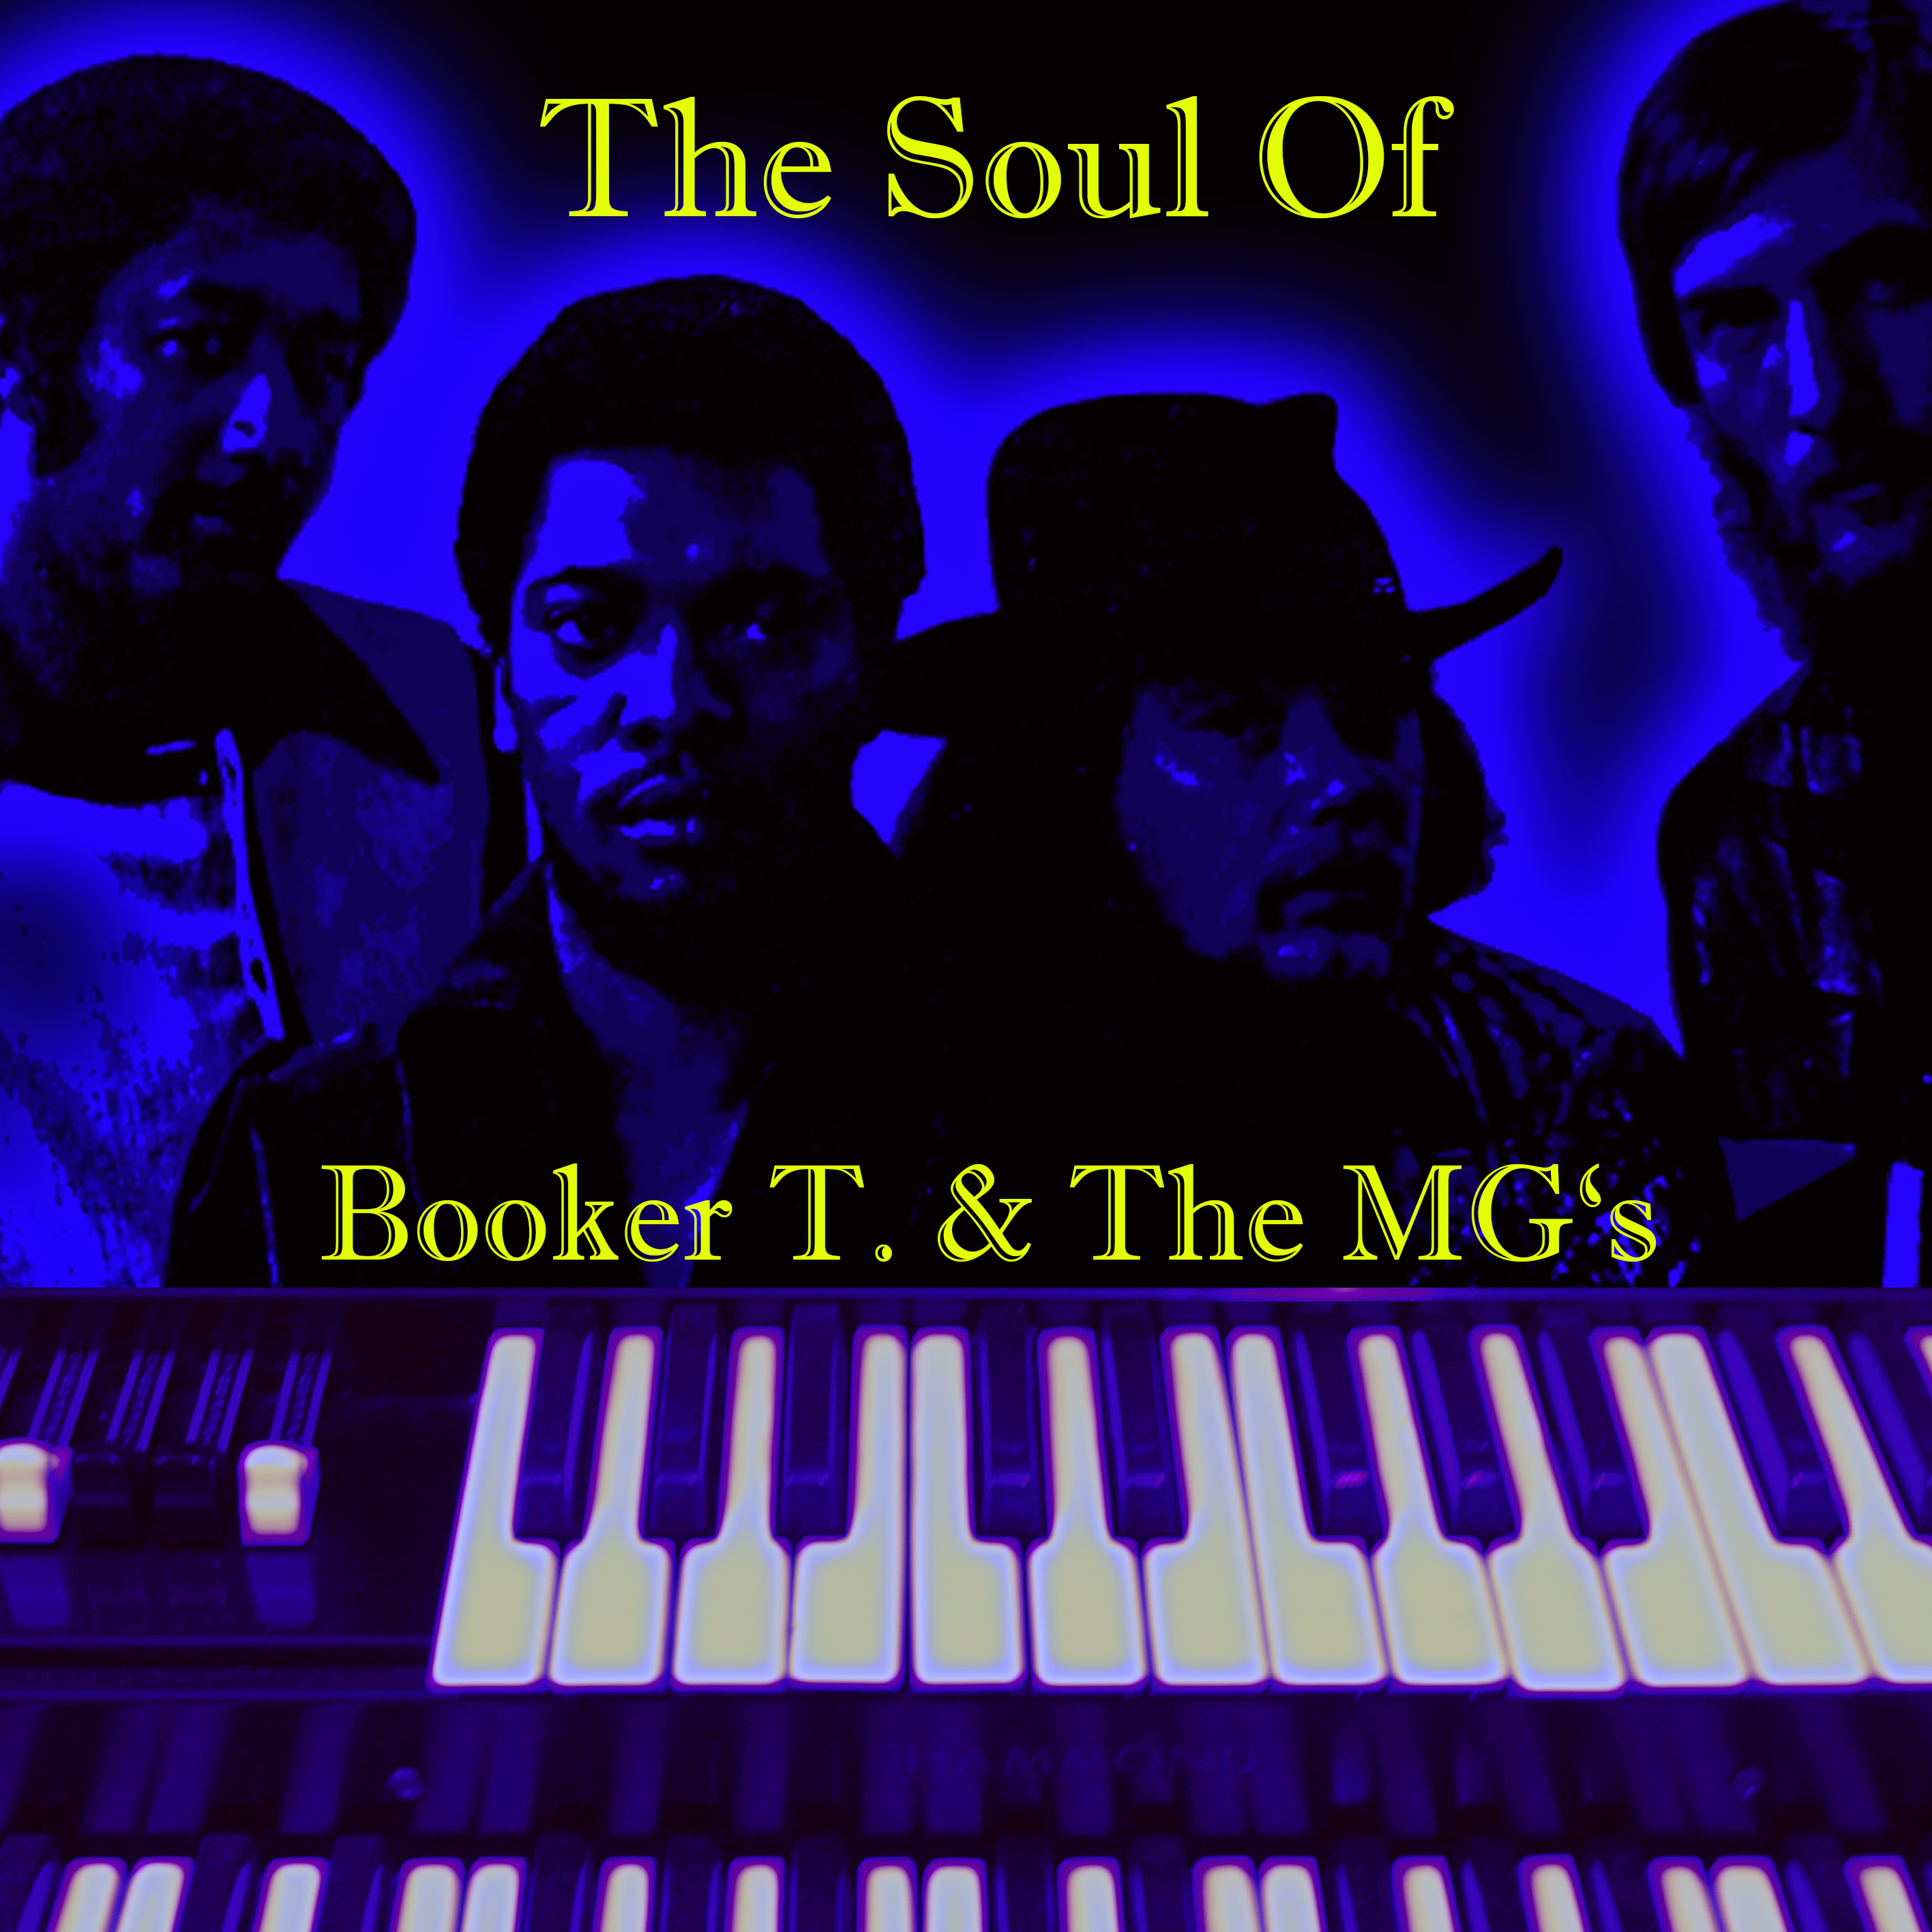 Booker T. & The MG's - The Soul Of Booker T. & The MG's (By Art&Music)